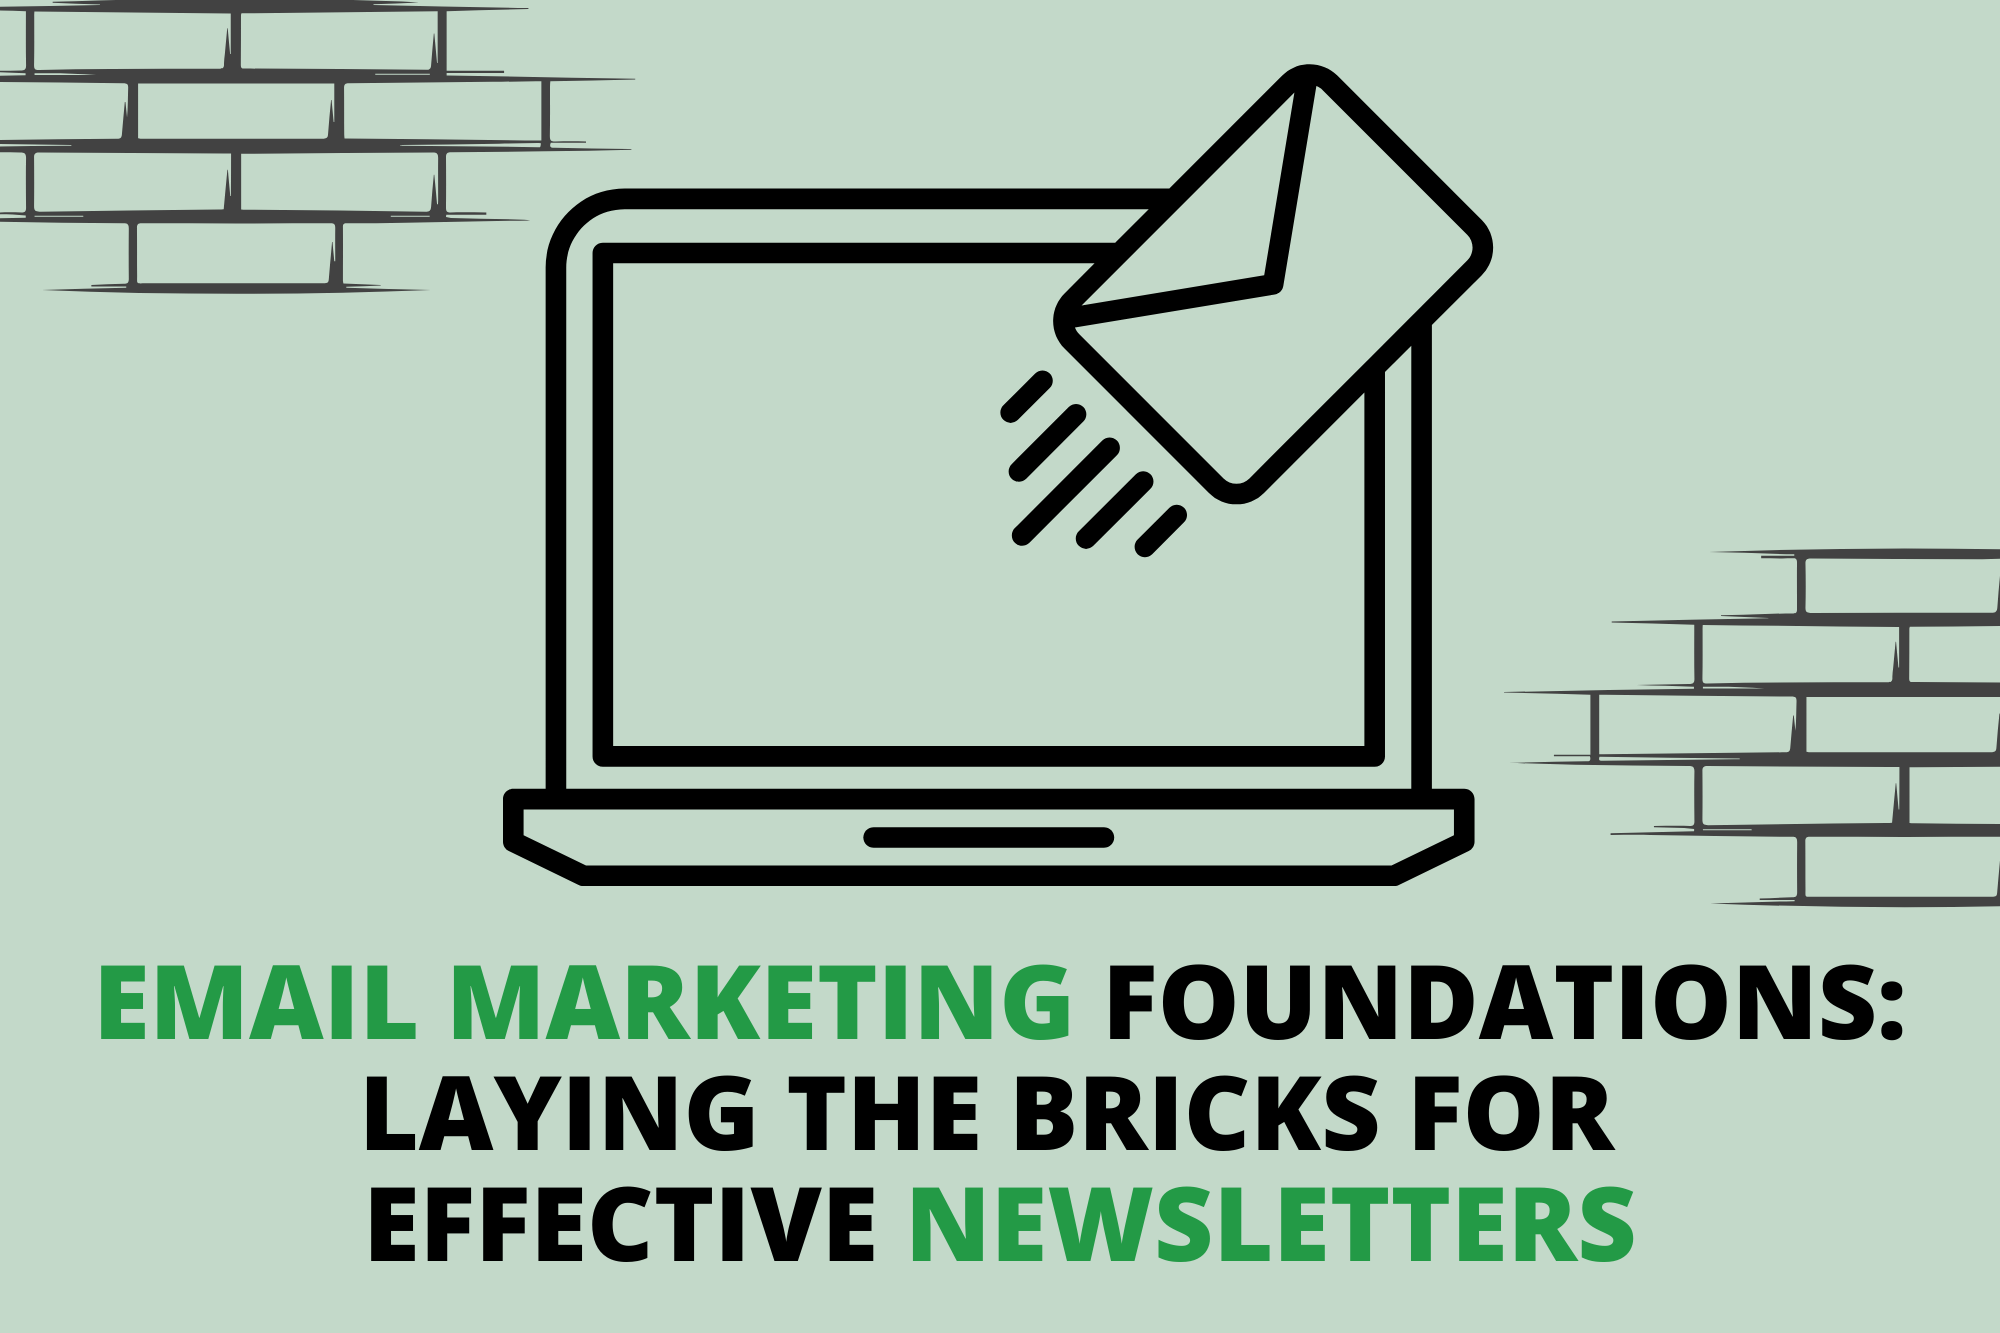 Email Marketing Foundations: Laying the Bricks for Effective Newsletters